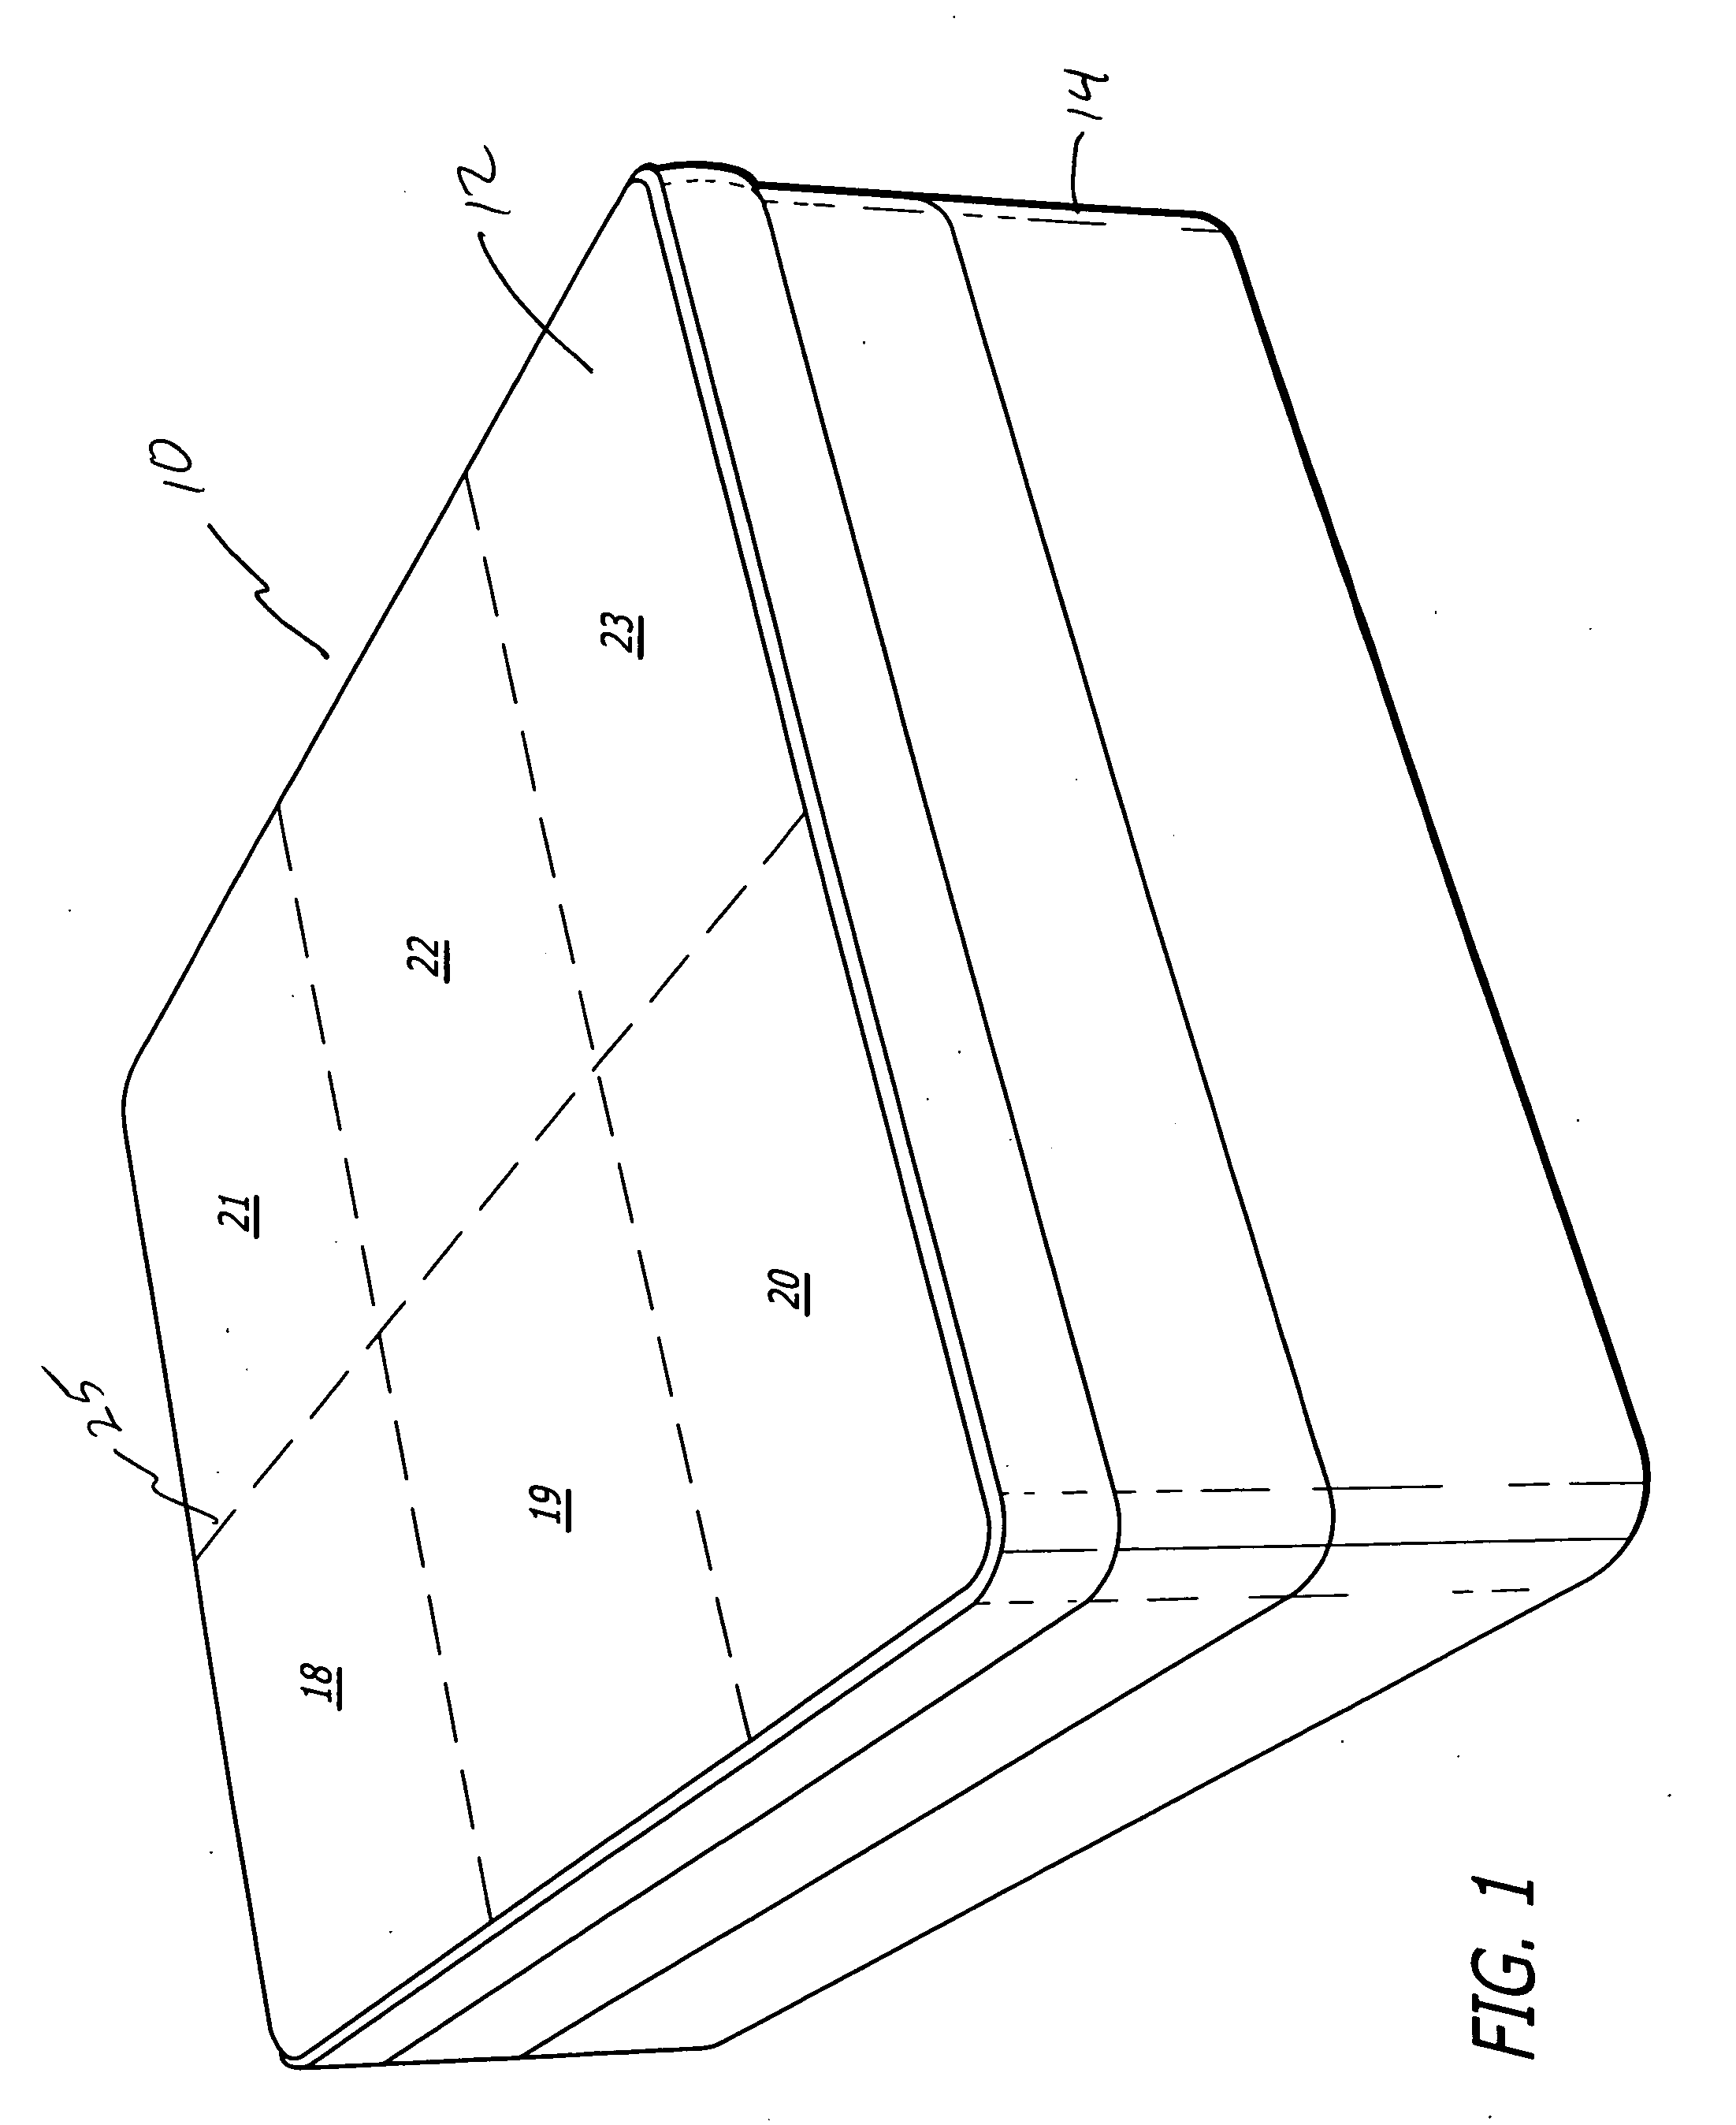 Composite mattress assembly and method for adjusting the same